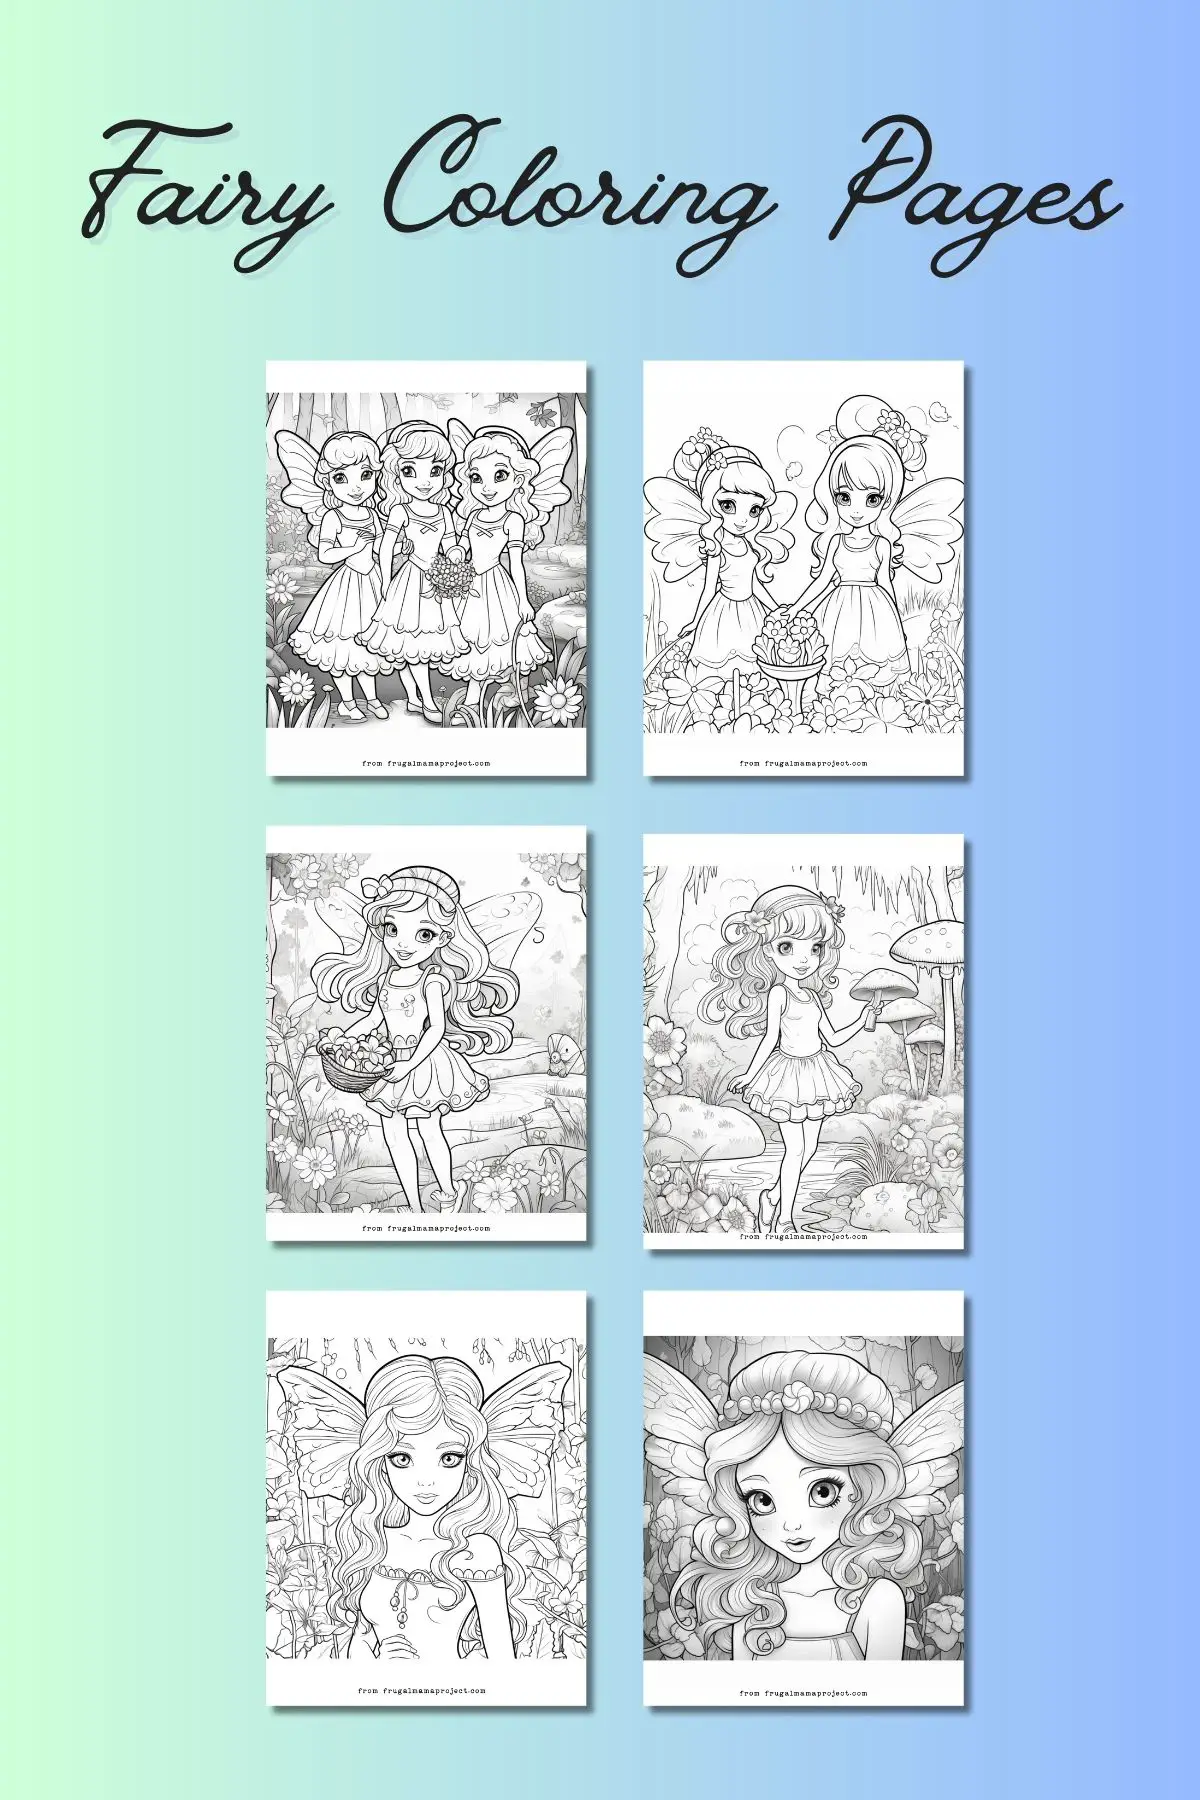 blue and green background with image of fairy coloring pages